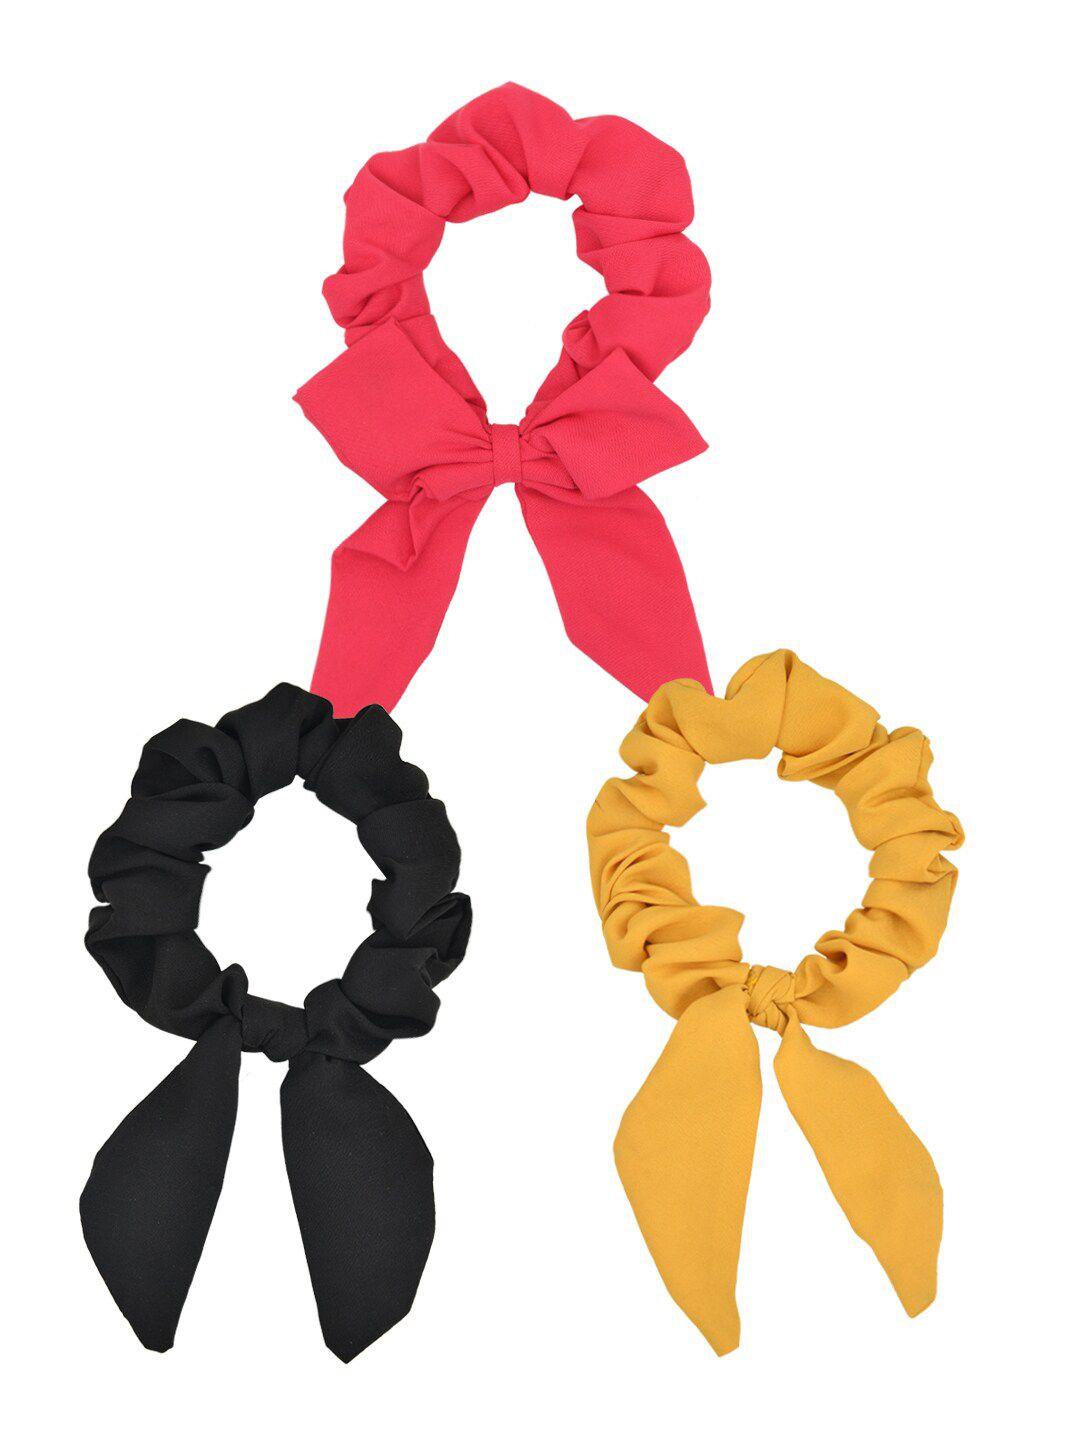 funkrafts girls yellow & red set of 3 scrunchies with bow